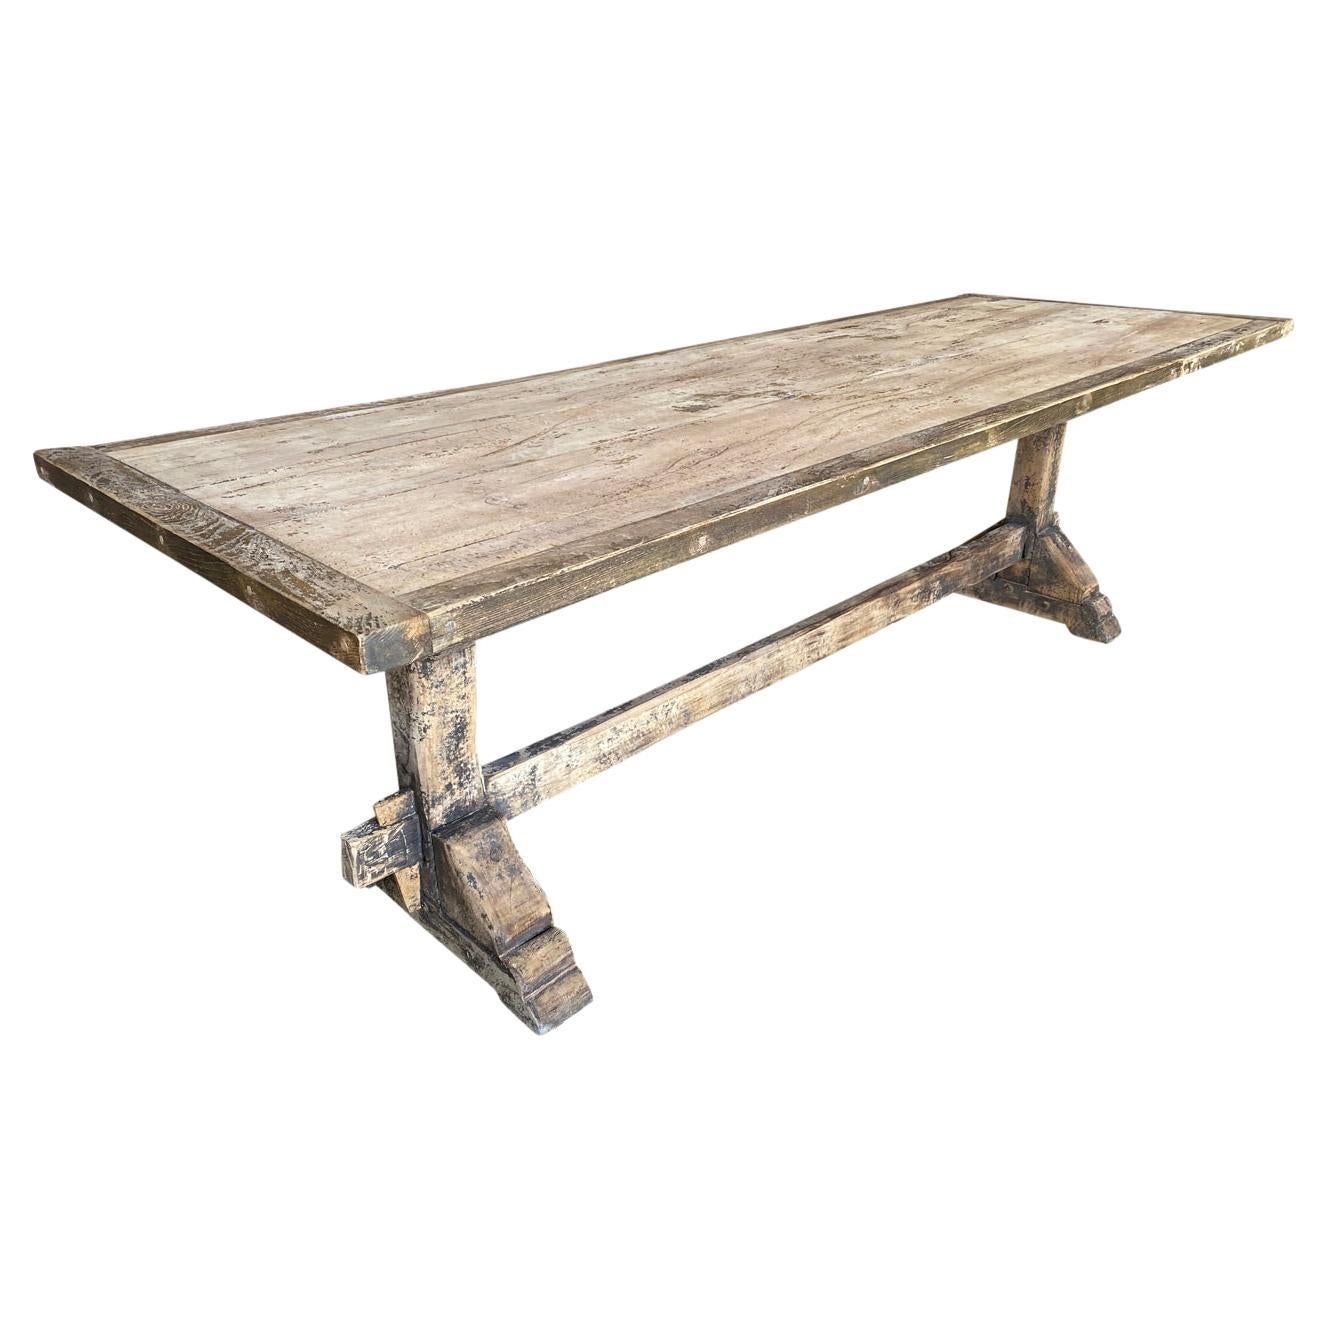 French 19th Century Primitive Farm Table - Trestle Table For Sale